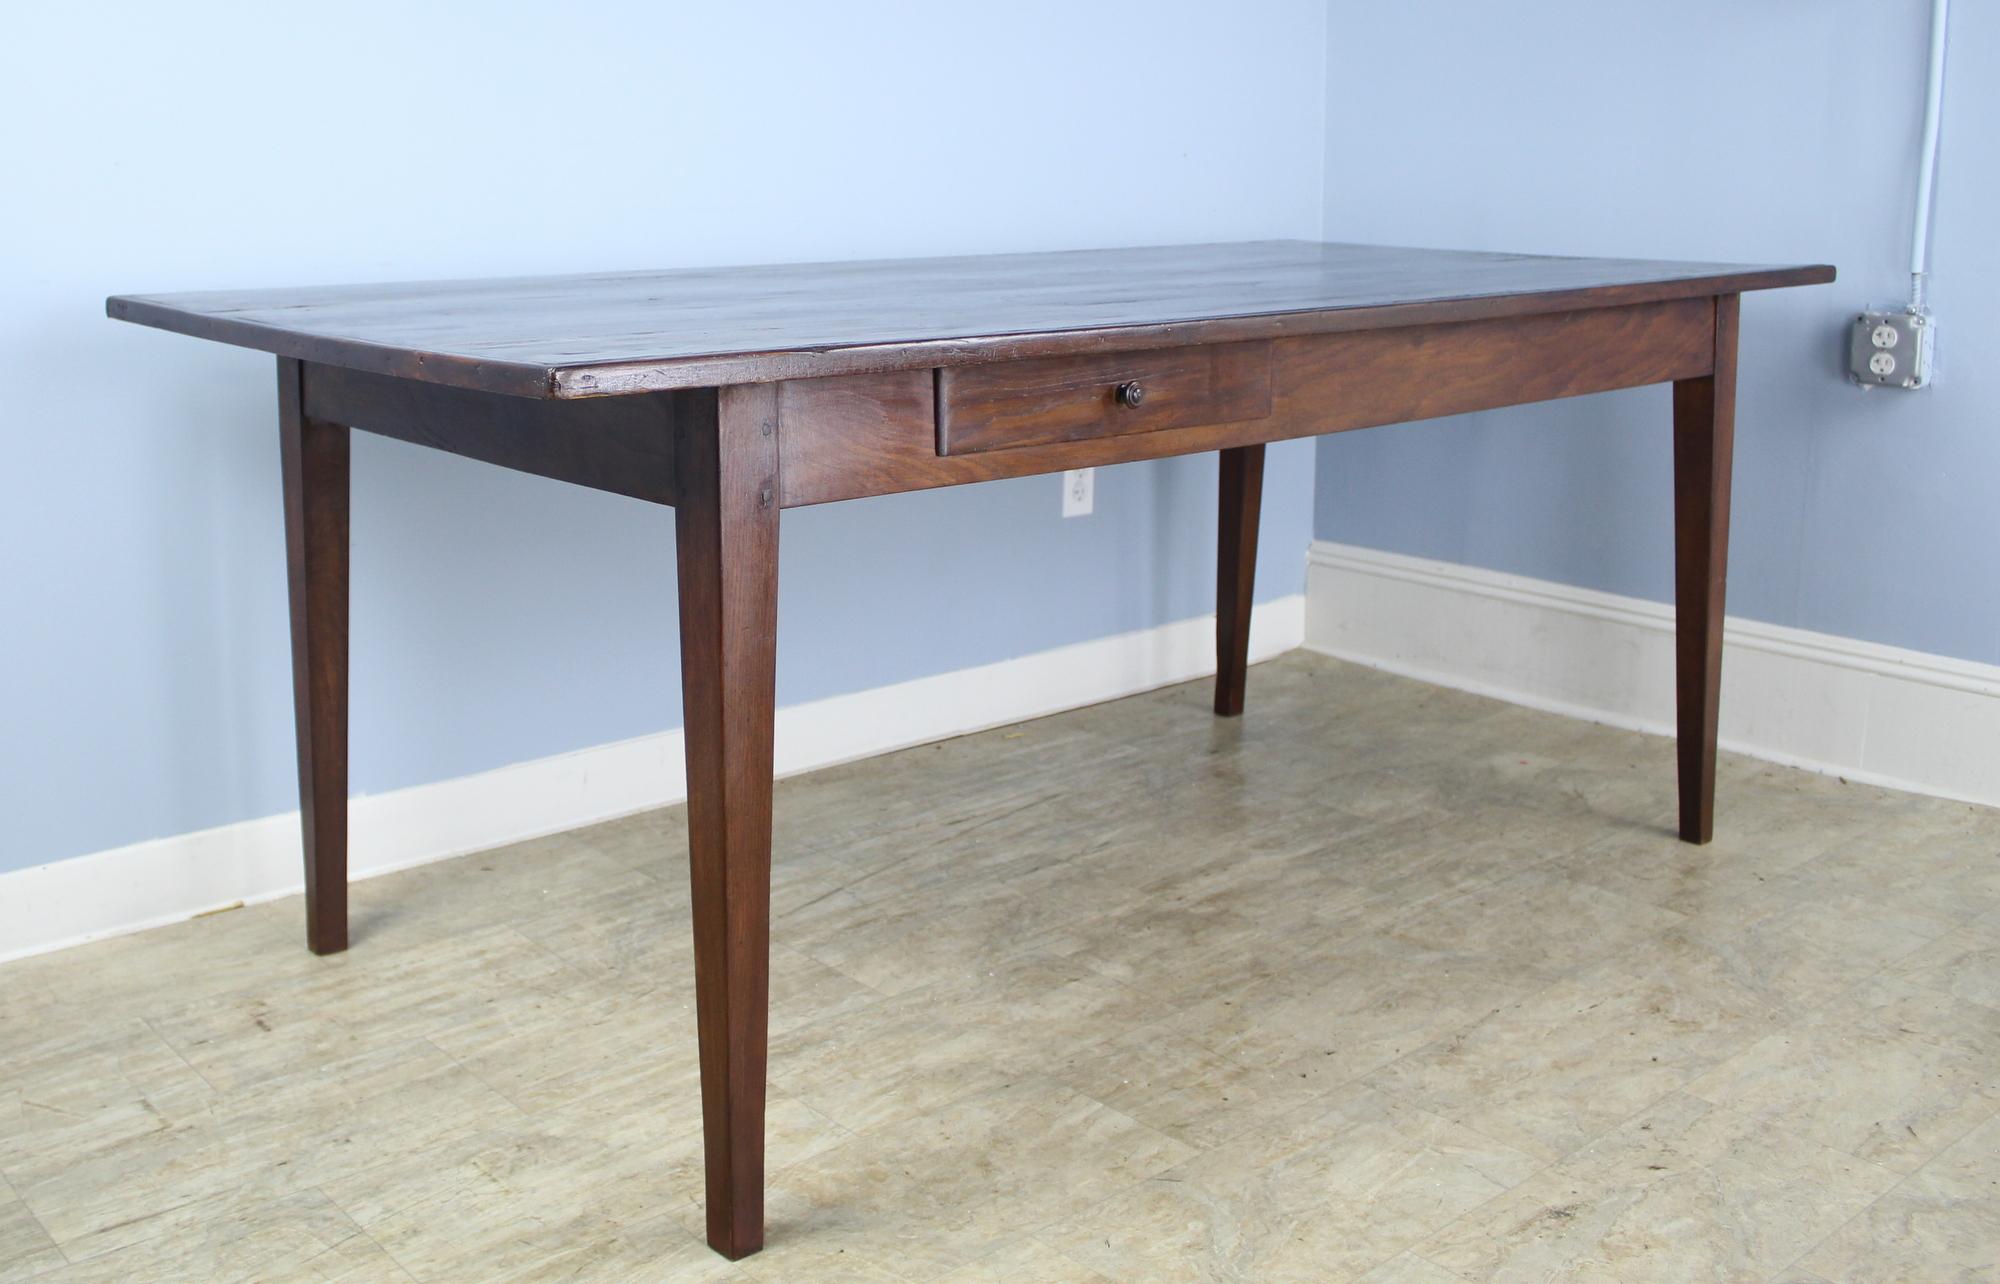 A fabulous dark farm table with many desirable features. It is nice and deep for an antique table so lots of room for platters in the center. The top has a lovely grain pattern and is trimmed with a traditional decorative edge. With 62 inches